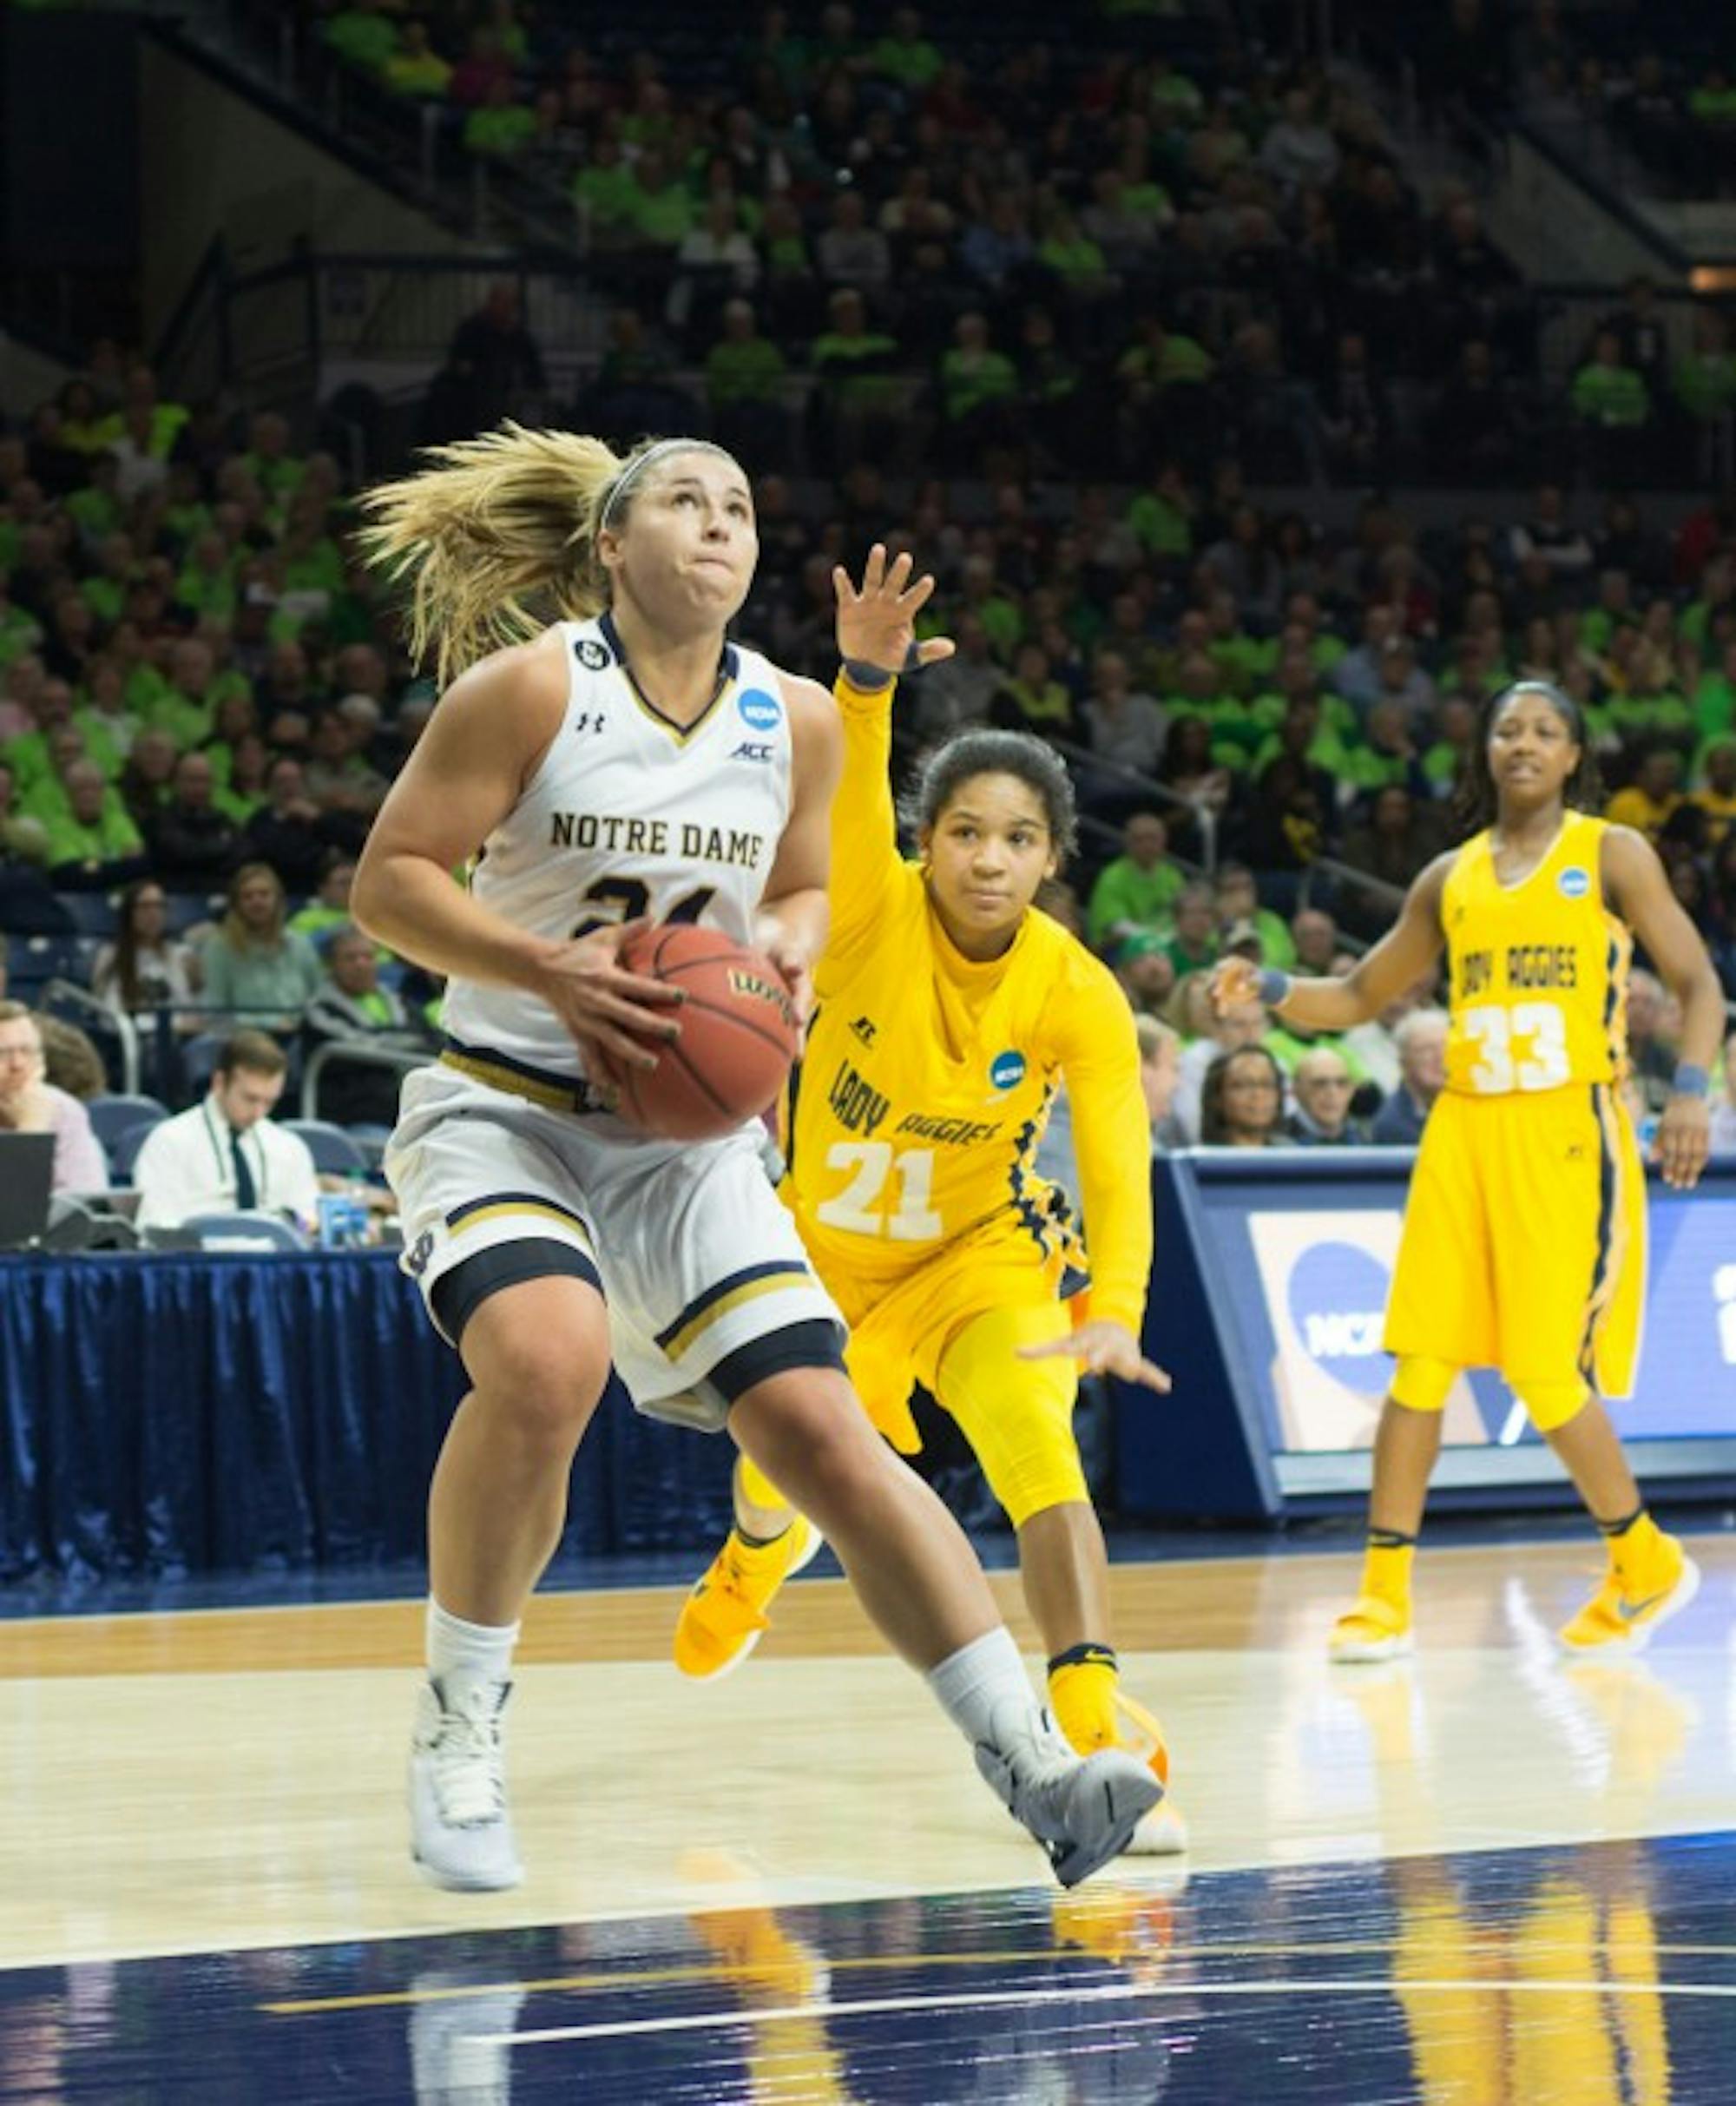 Irish senior guard Hannah Huffman gathers for a shot during Notre Dame's 95-61 victory over North Carolina A&T in the first round of the NCAA tournament on Saturday at Purcell Pavilion.